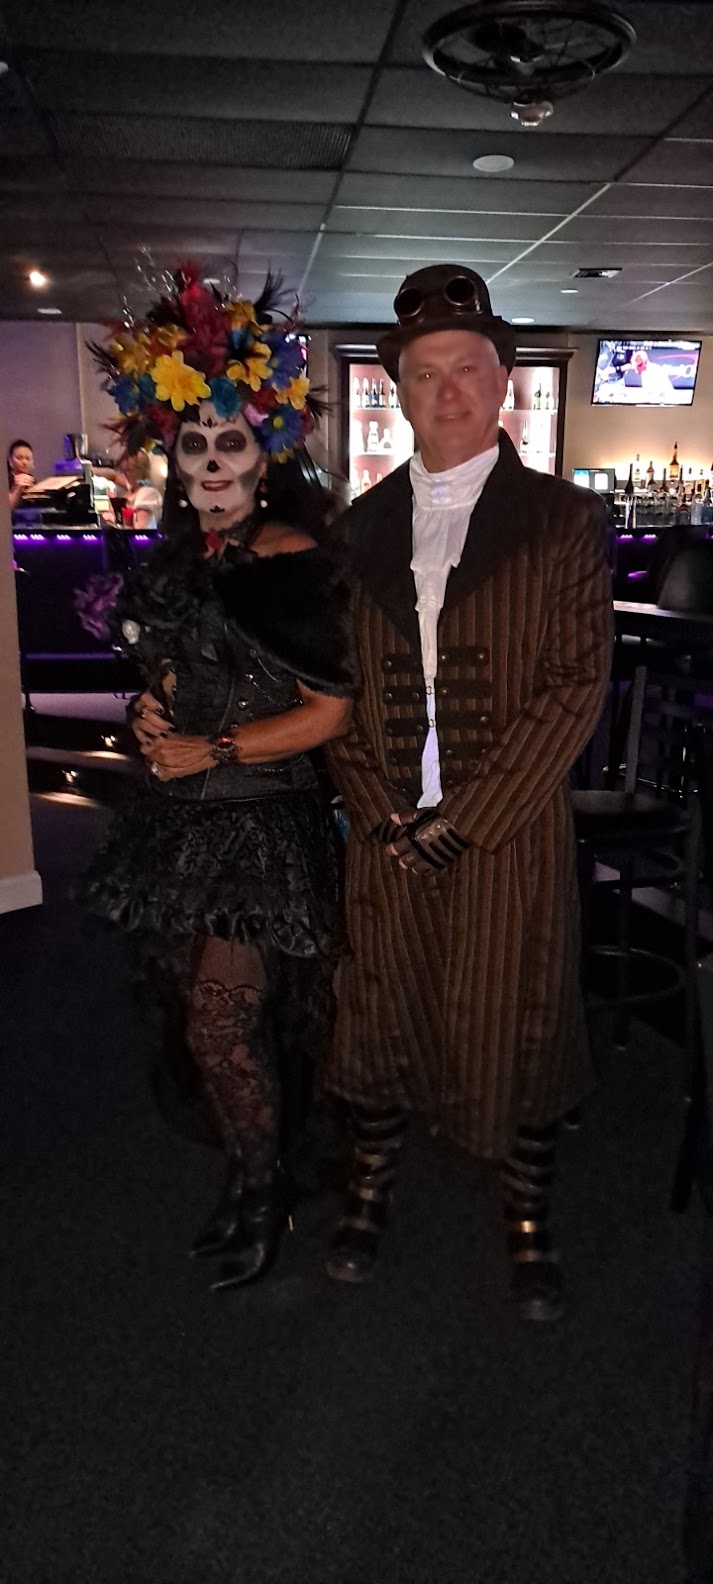 A man and woman dressed as skeletons in a bar.